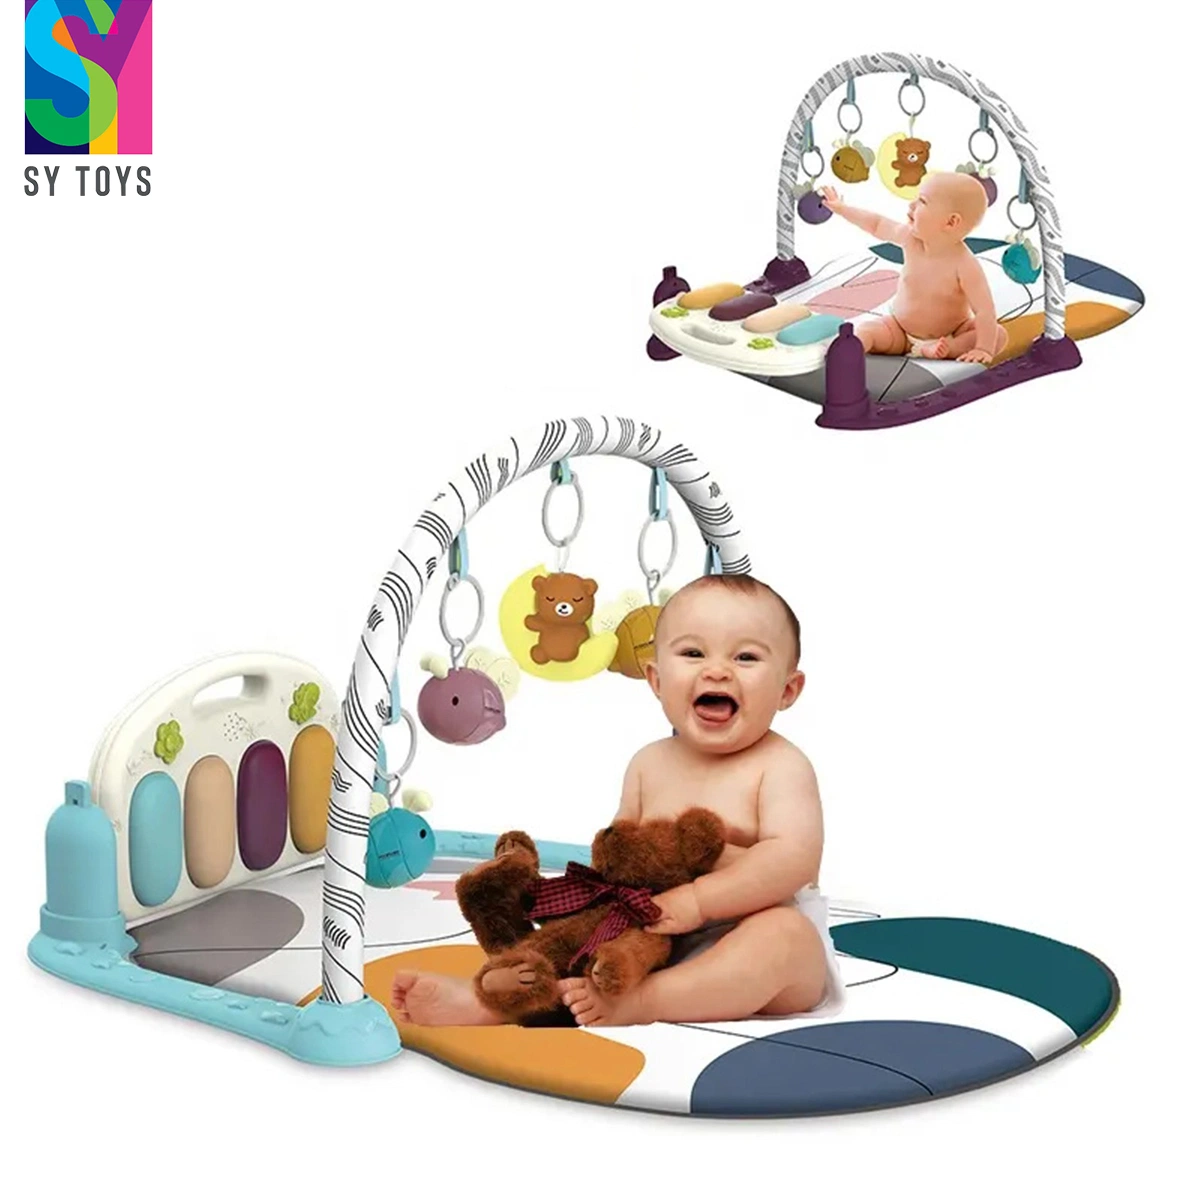 Sy Toys Wholesale Baby Gym Training Foldable Musical Play Mat Kids Handmade Activity Mat Baby Products with Piano